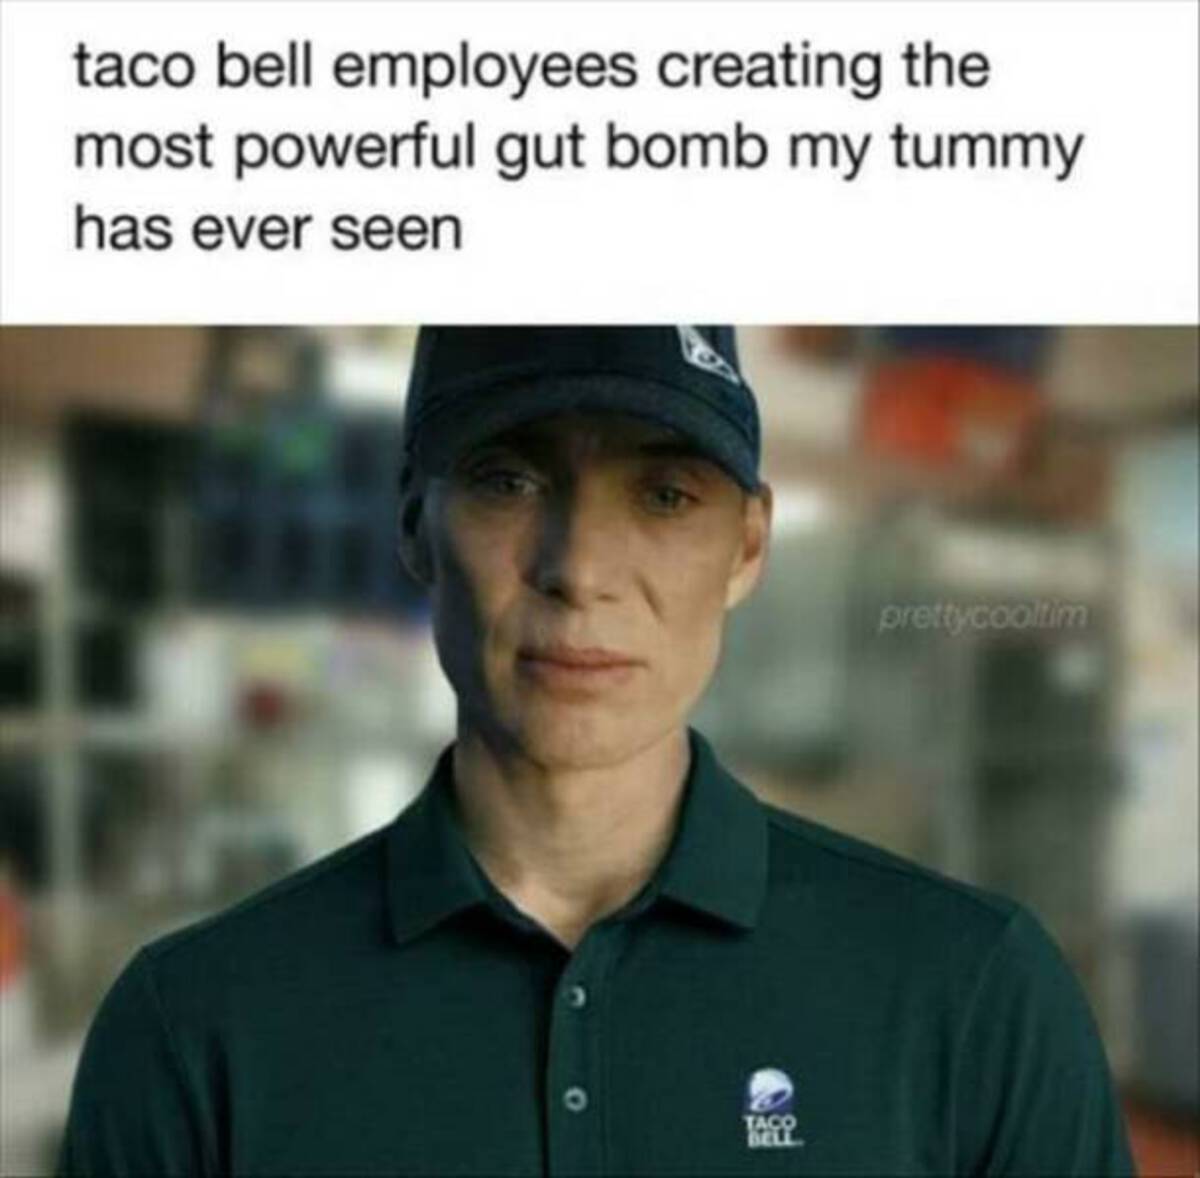 photo caption - taco bell employees creating the most powerful gut bomb my tummy has ever seen Taco prettycoolfim